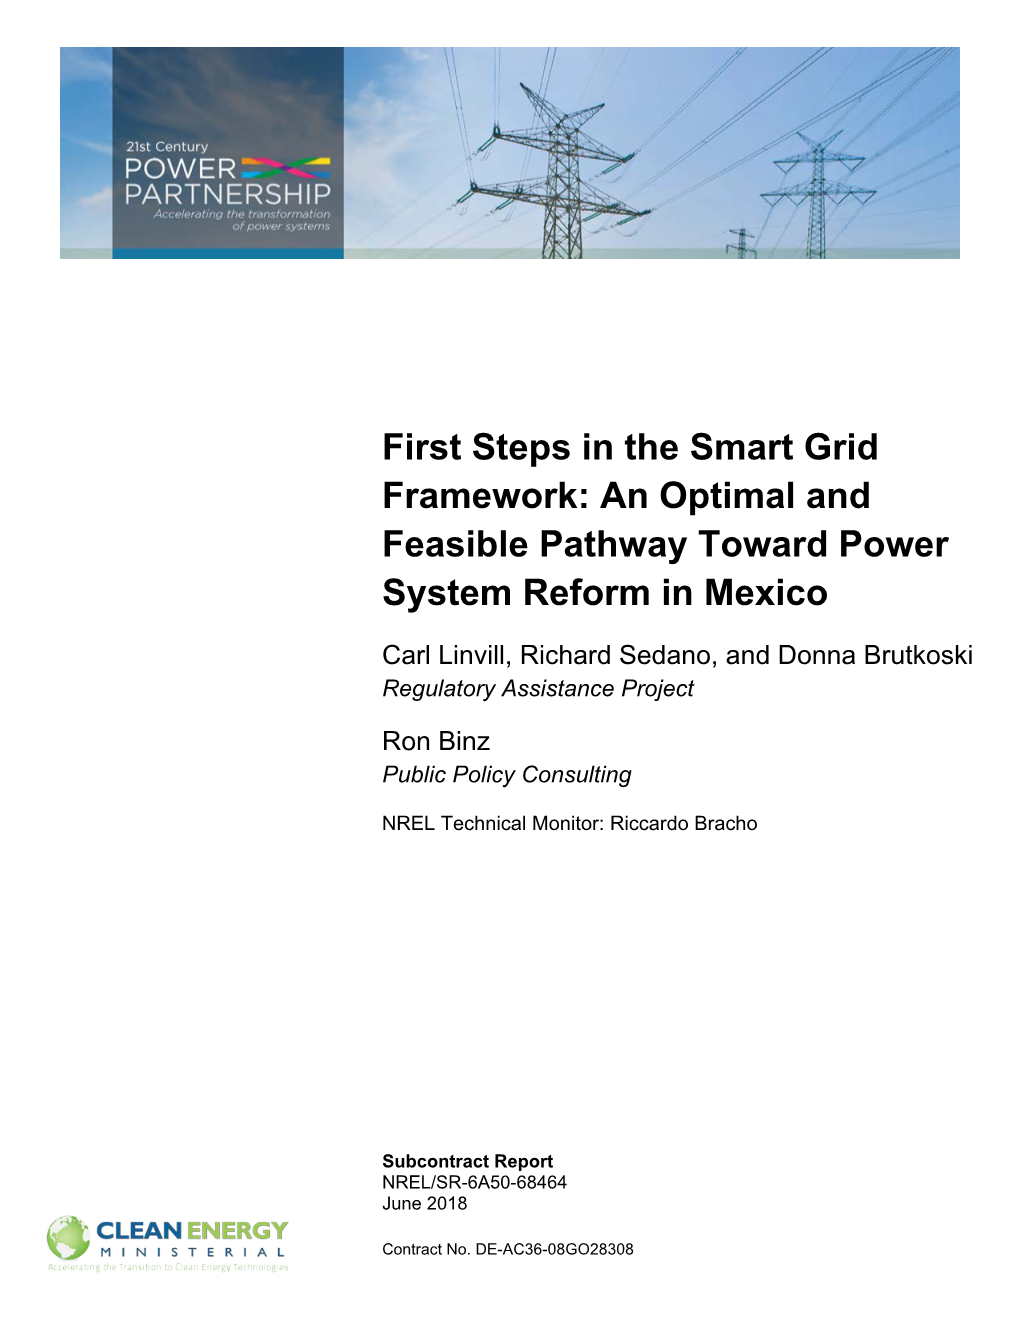 First Steps in the Smart Grid Framework: an Optimal and Feasible Pathway Toward Power System Reform in Mexico